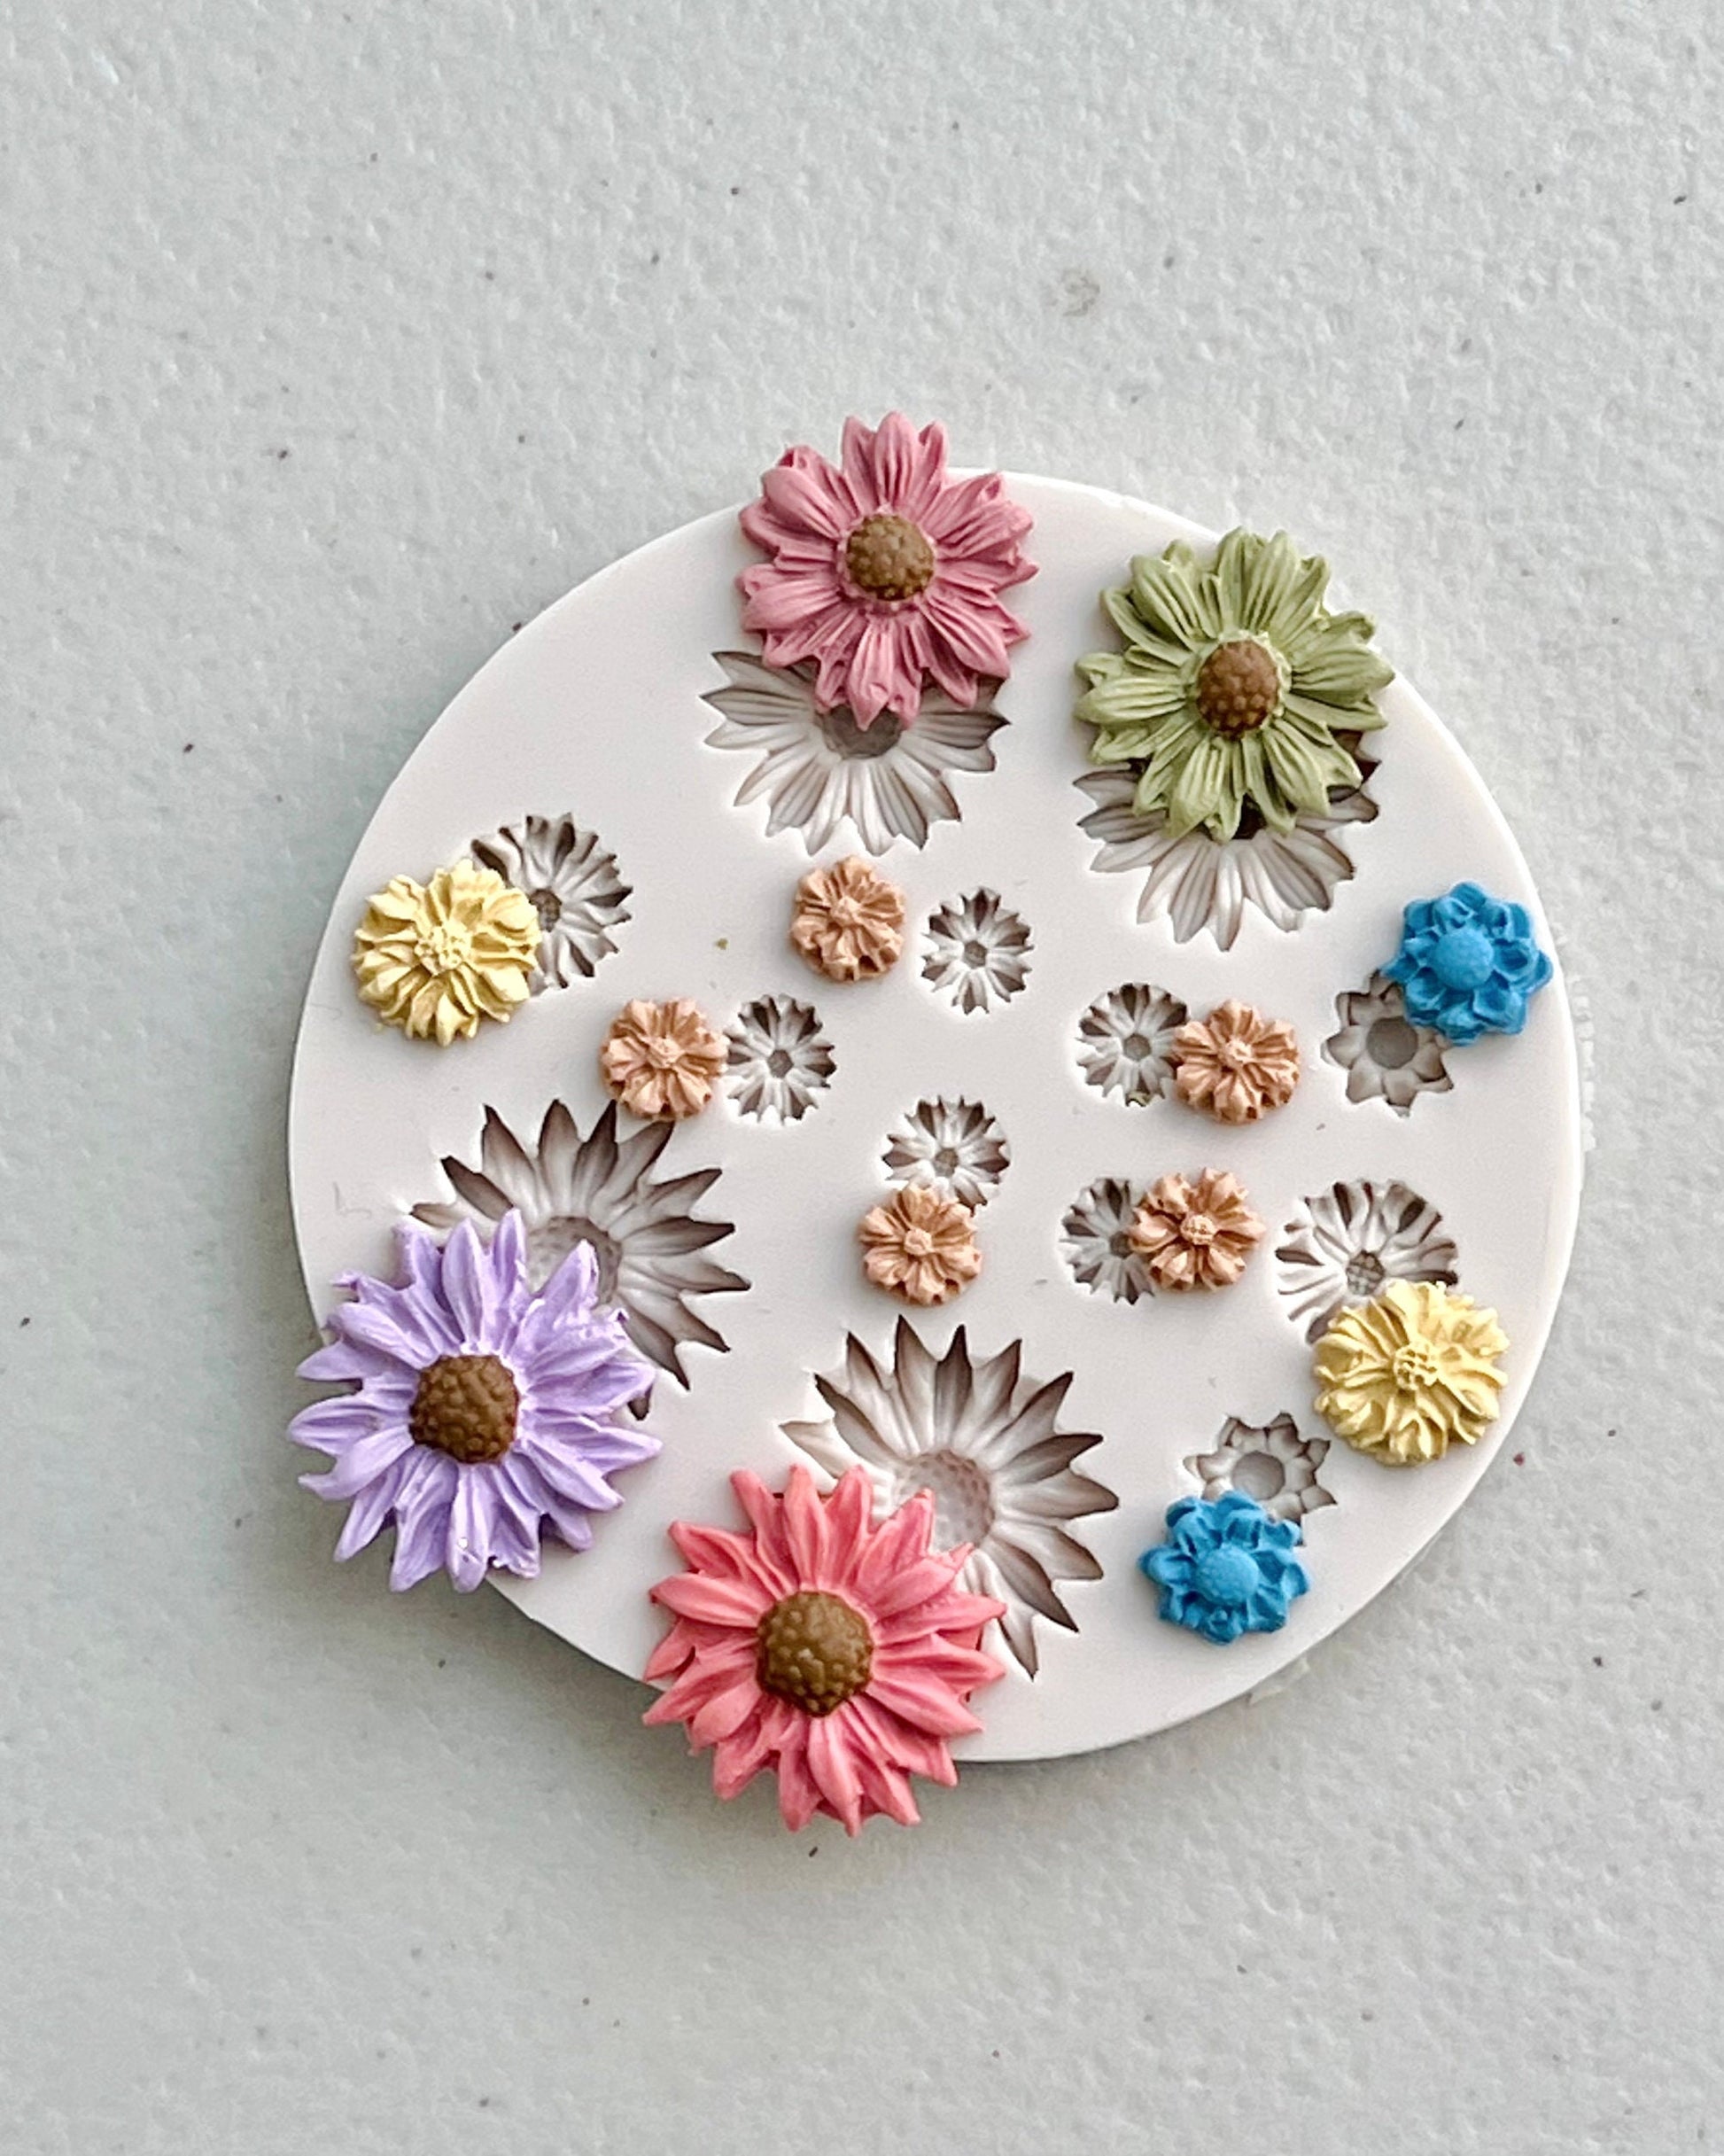 Mini flowers silicone mold polymer clay cake decor flowers mold for resin